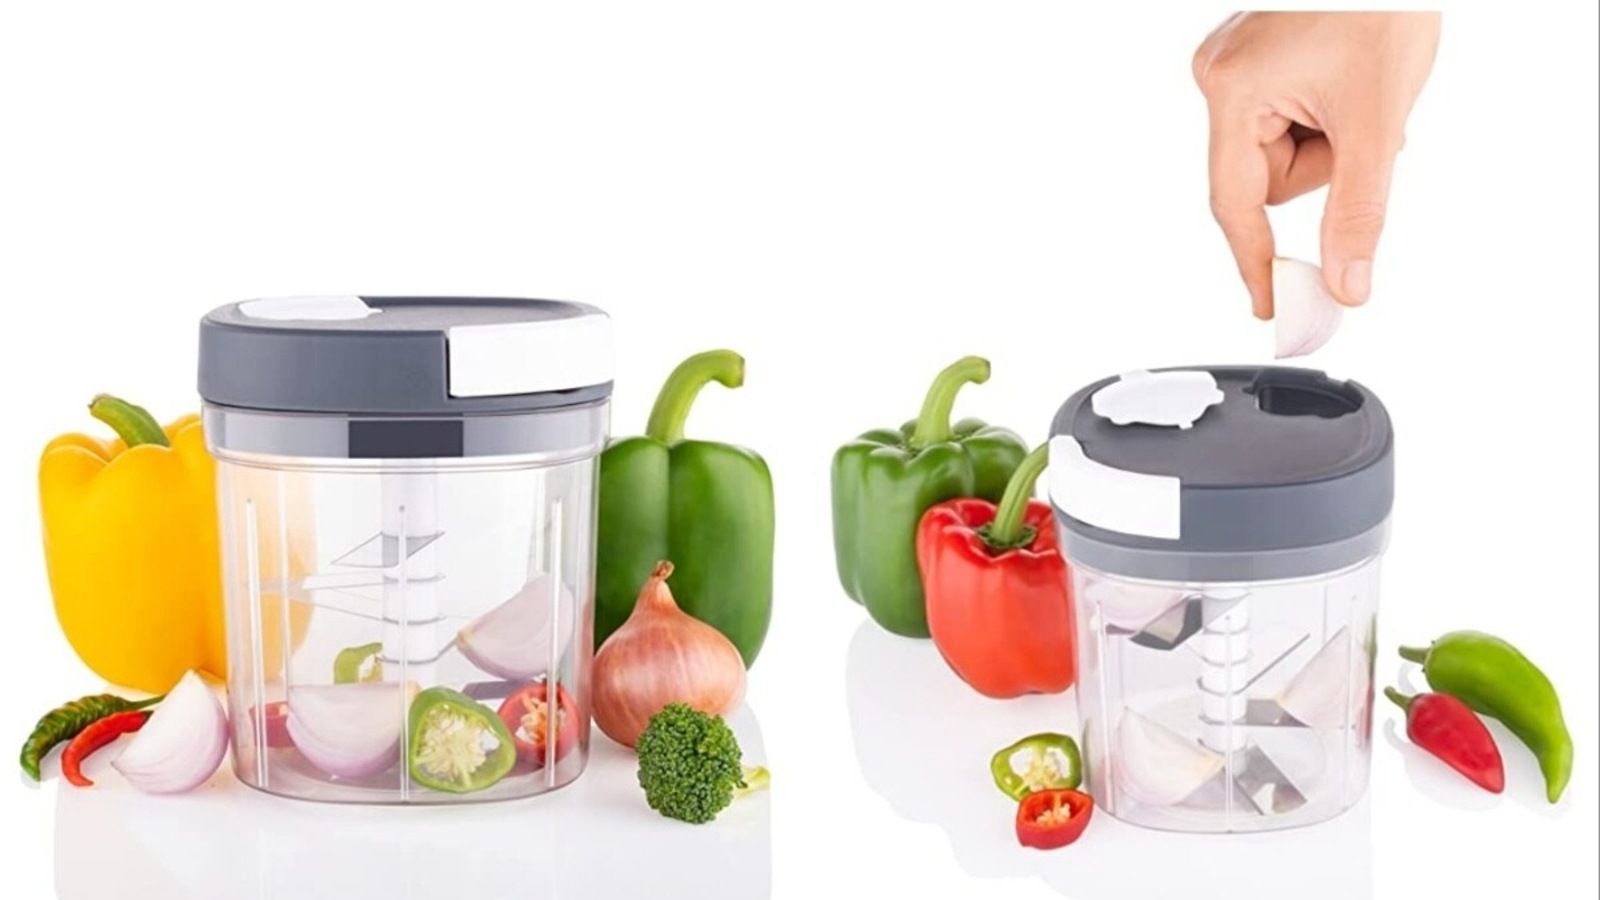 E-COSMOS Food Chopper 900ml, Steel Large Manual Hand-Press Vegetable  Chopper Mixer Cutter to Cut Onion, Salad, Tomato, Potato (Pack of 1) 900ml